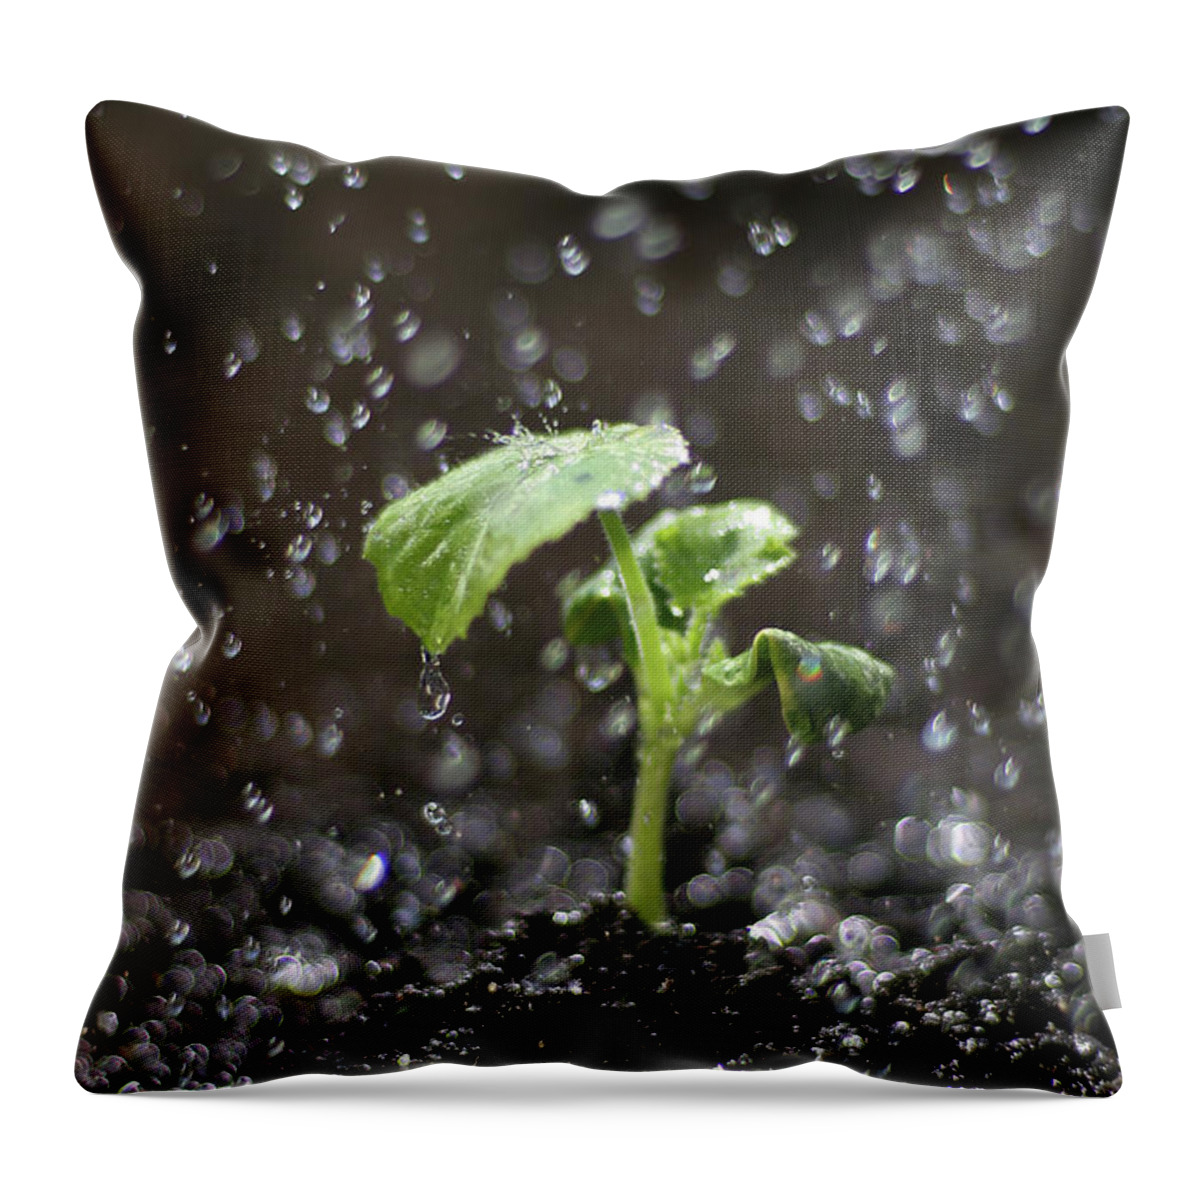 Outdoors Throw Pillow featuring the photograph Shallow Depth Of Field Watering Sprout by Dess